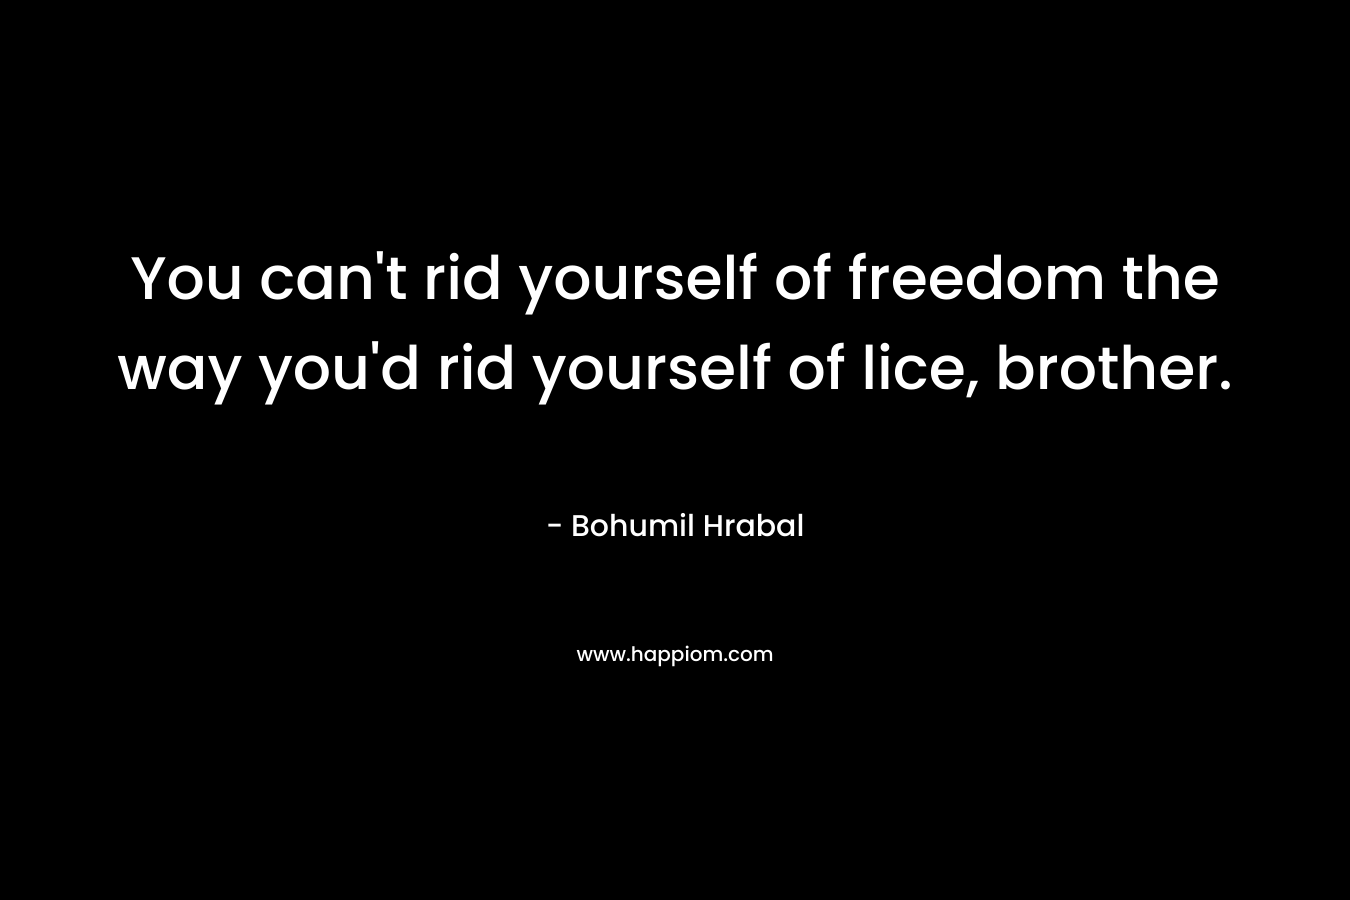 You can’t rid yourself of freedom the way you’d rid yourself of lice, brother. – Bohumil Hrabal